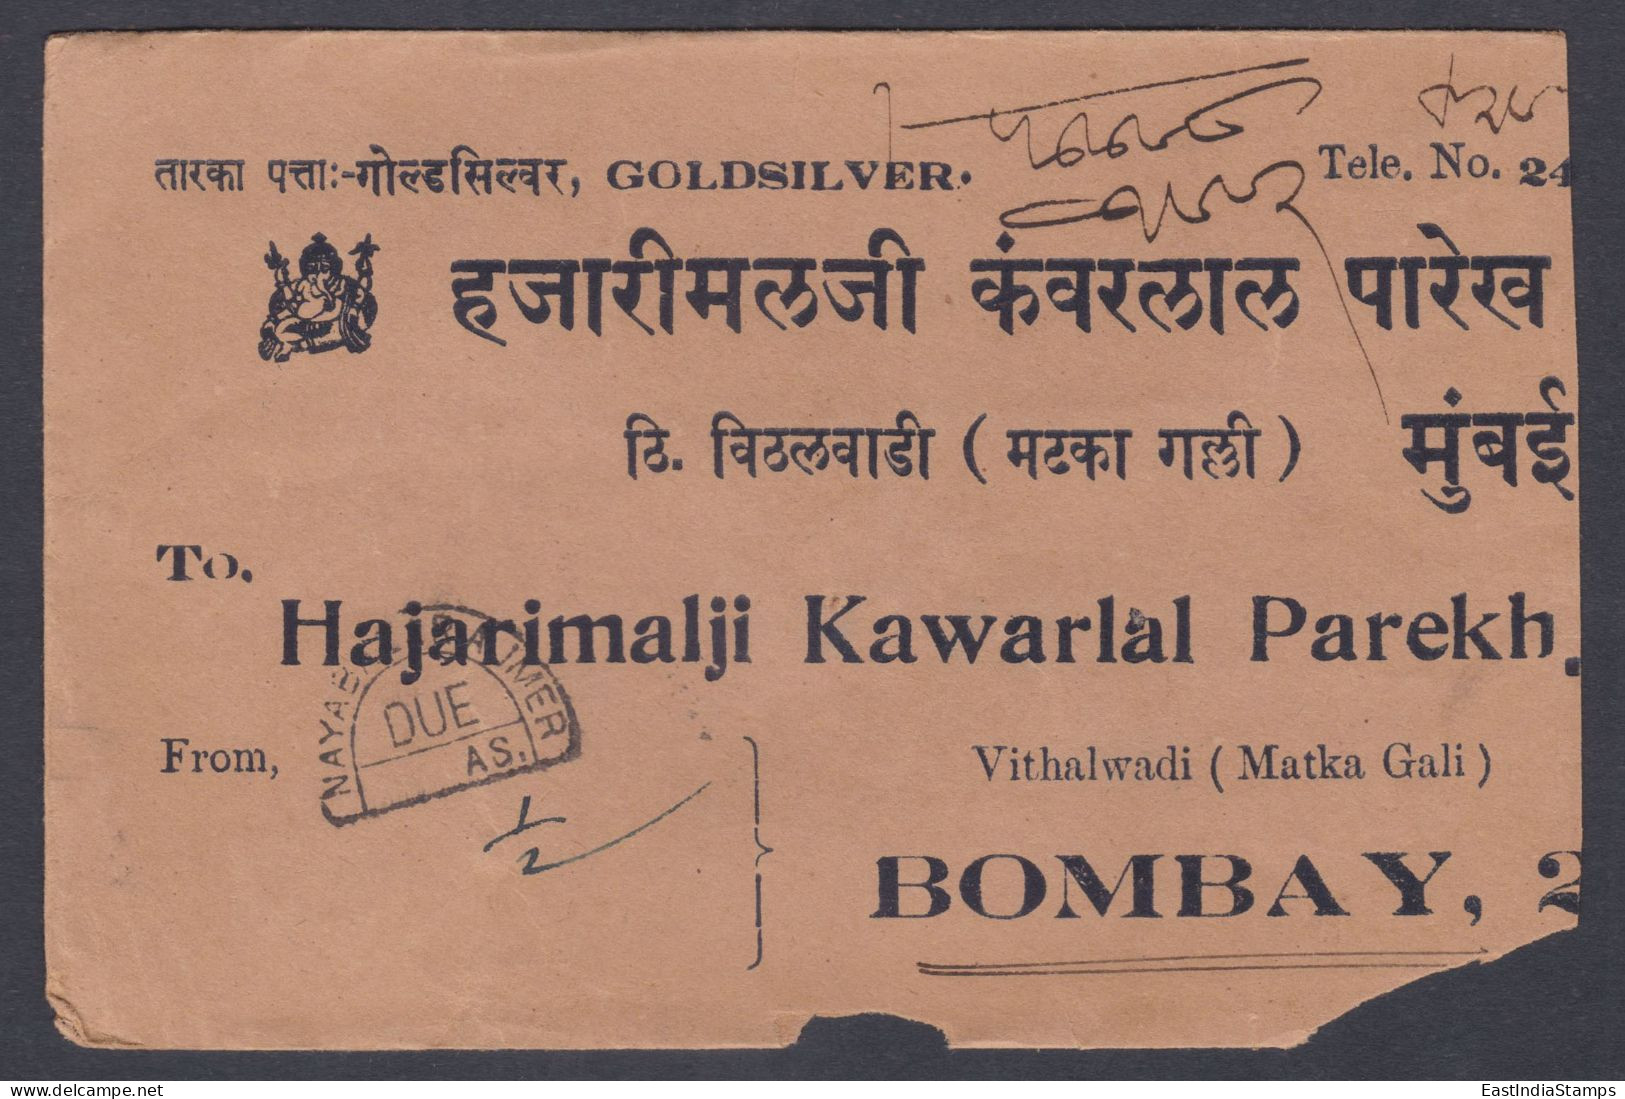 Inde British India 1935 Used Postage Due Cover, To Bombay, King George V Stamp - 1911-35 King George V